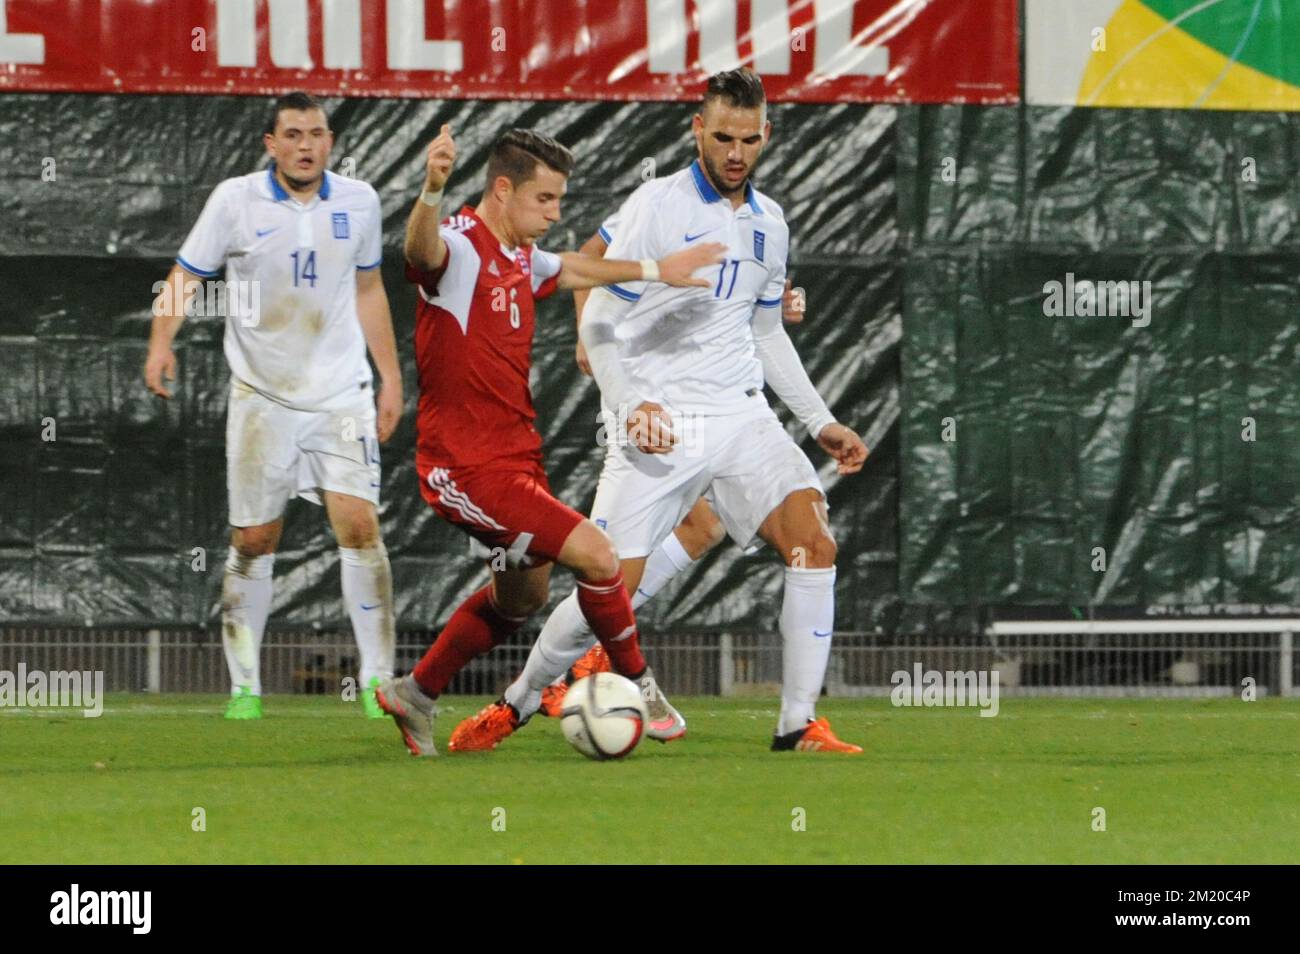 20151113 - DIFFERDANGE, LUXEMBOURG: Luxembourg's Chris Philipps and Greece's Panagiotis Tachtsidis fight for the ball during a friendly soccer game between Luxembourg national team and Greece, in Differdange, Luxembourg, Friday 13 November 2015. BELGA PHOTO SOPHIE KIP Stock Photo